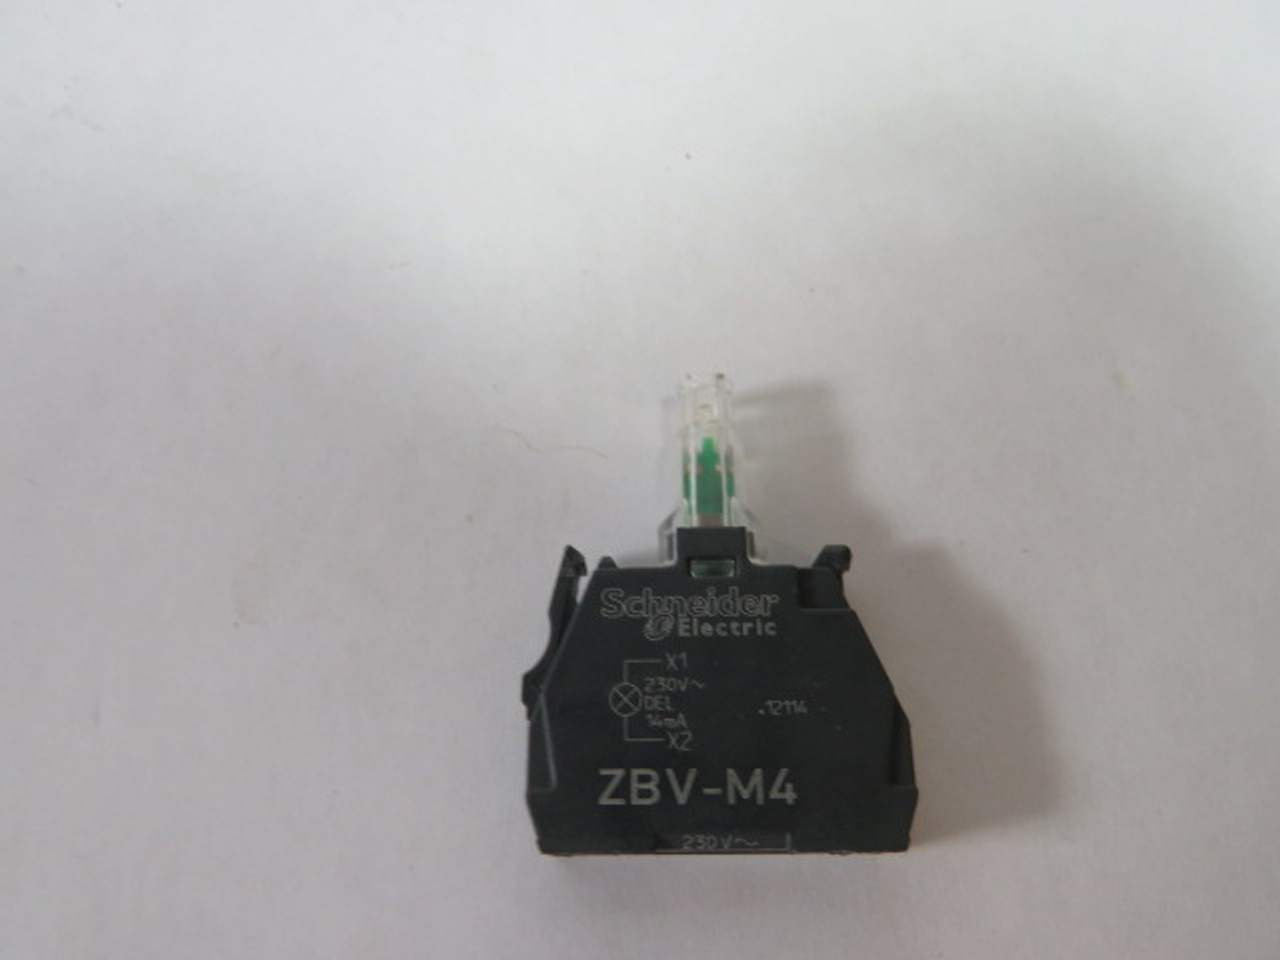 Schneider Electric ZBV-M4 Contact Block w/ Light Module 230V 14mA USED